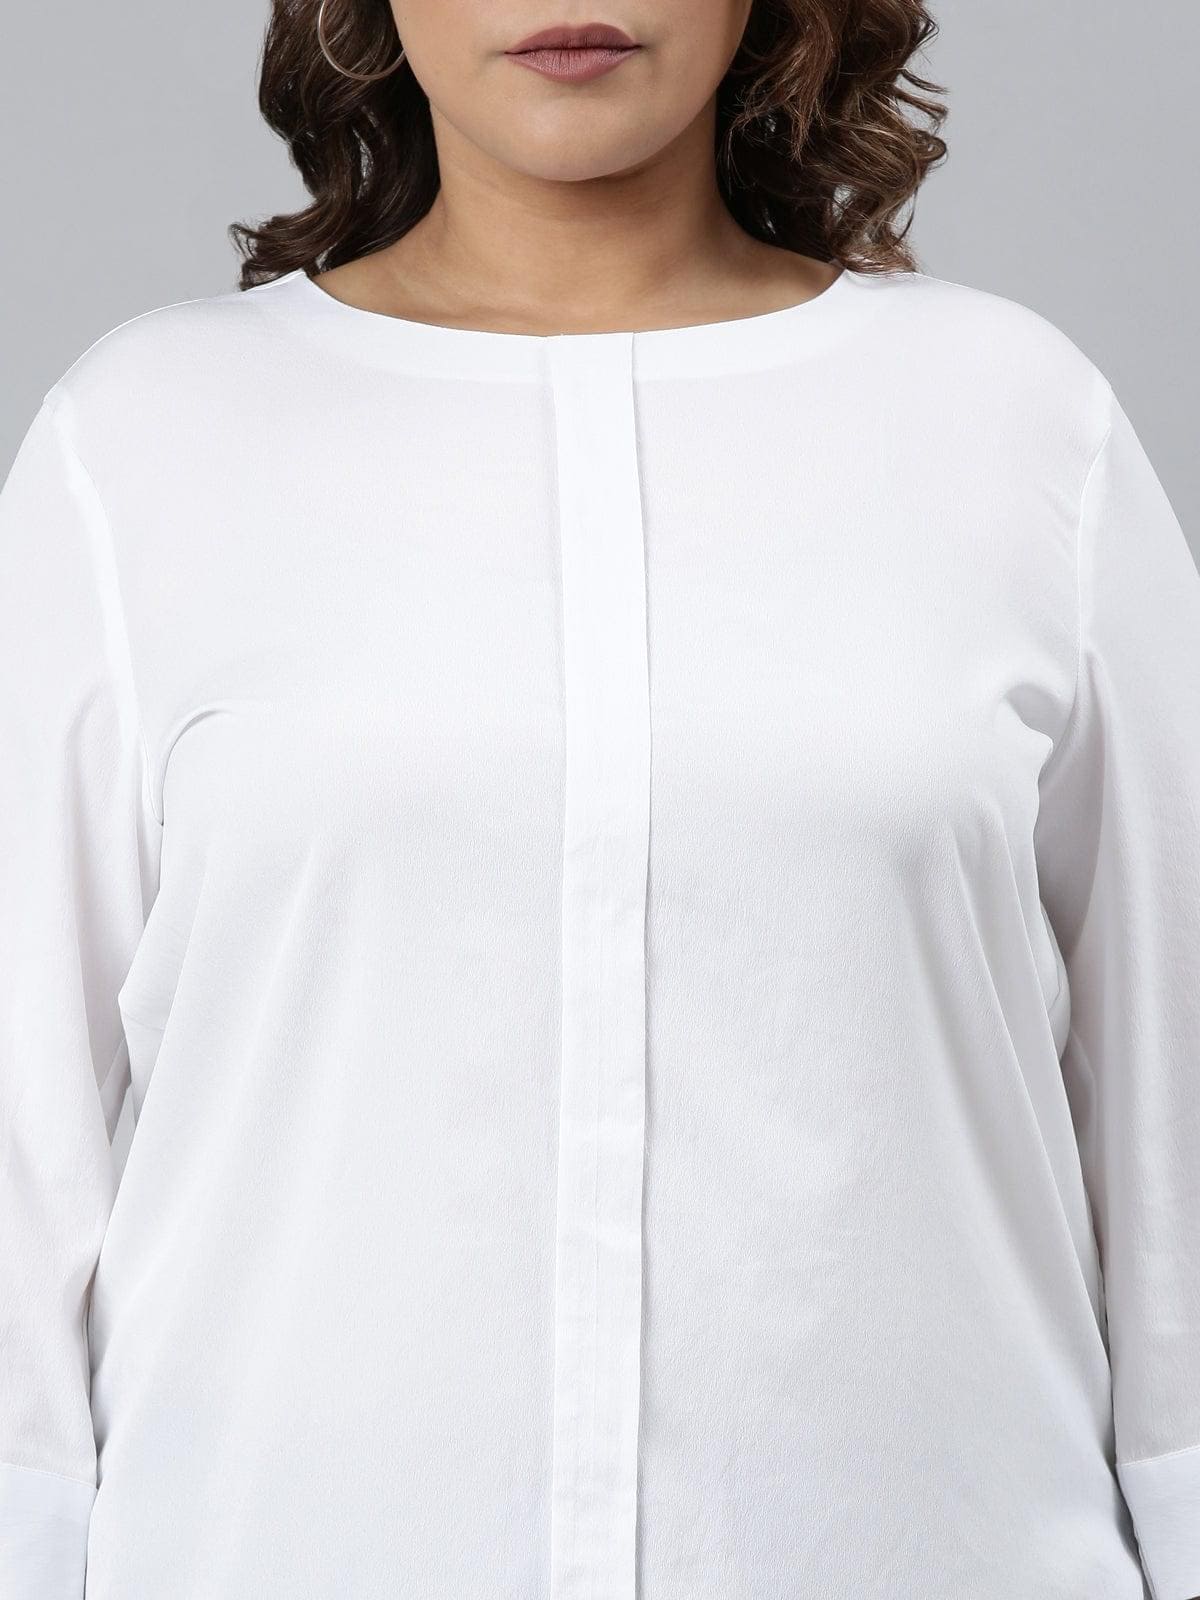 buy TheShaili crepe white tops at best prices   India